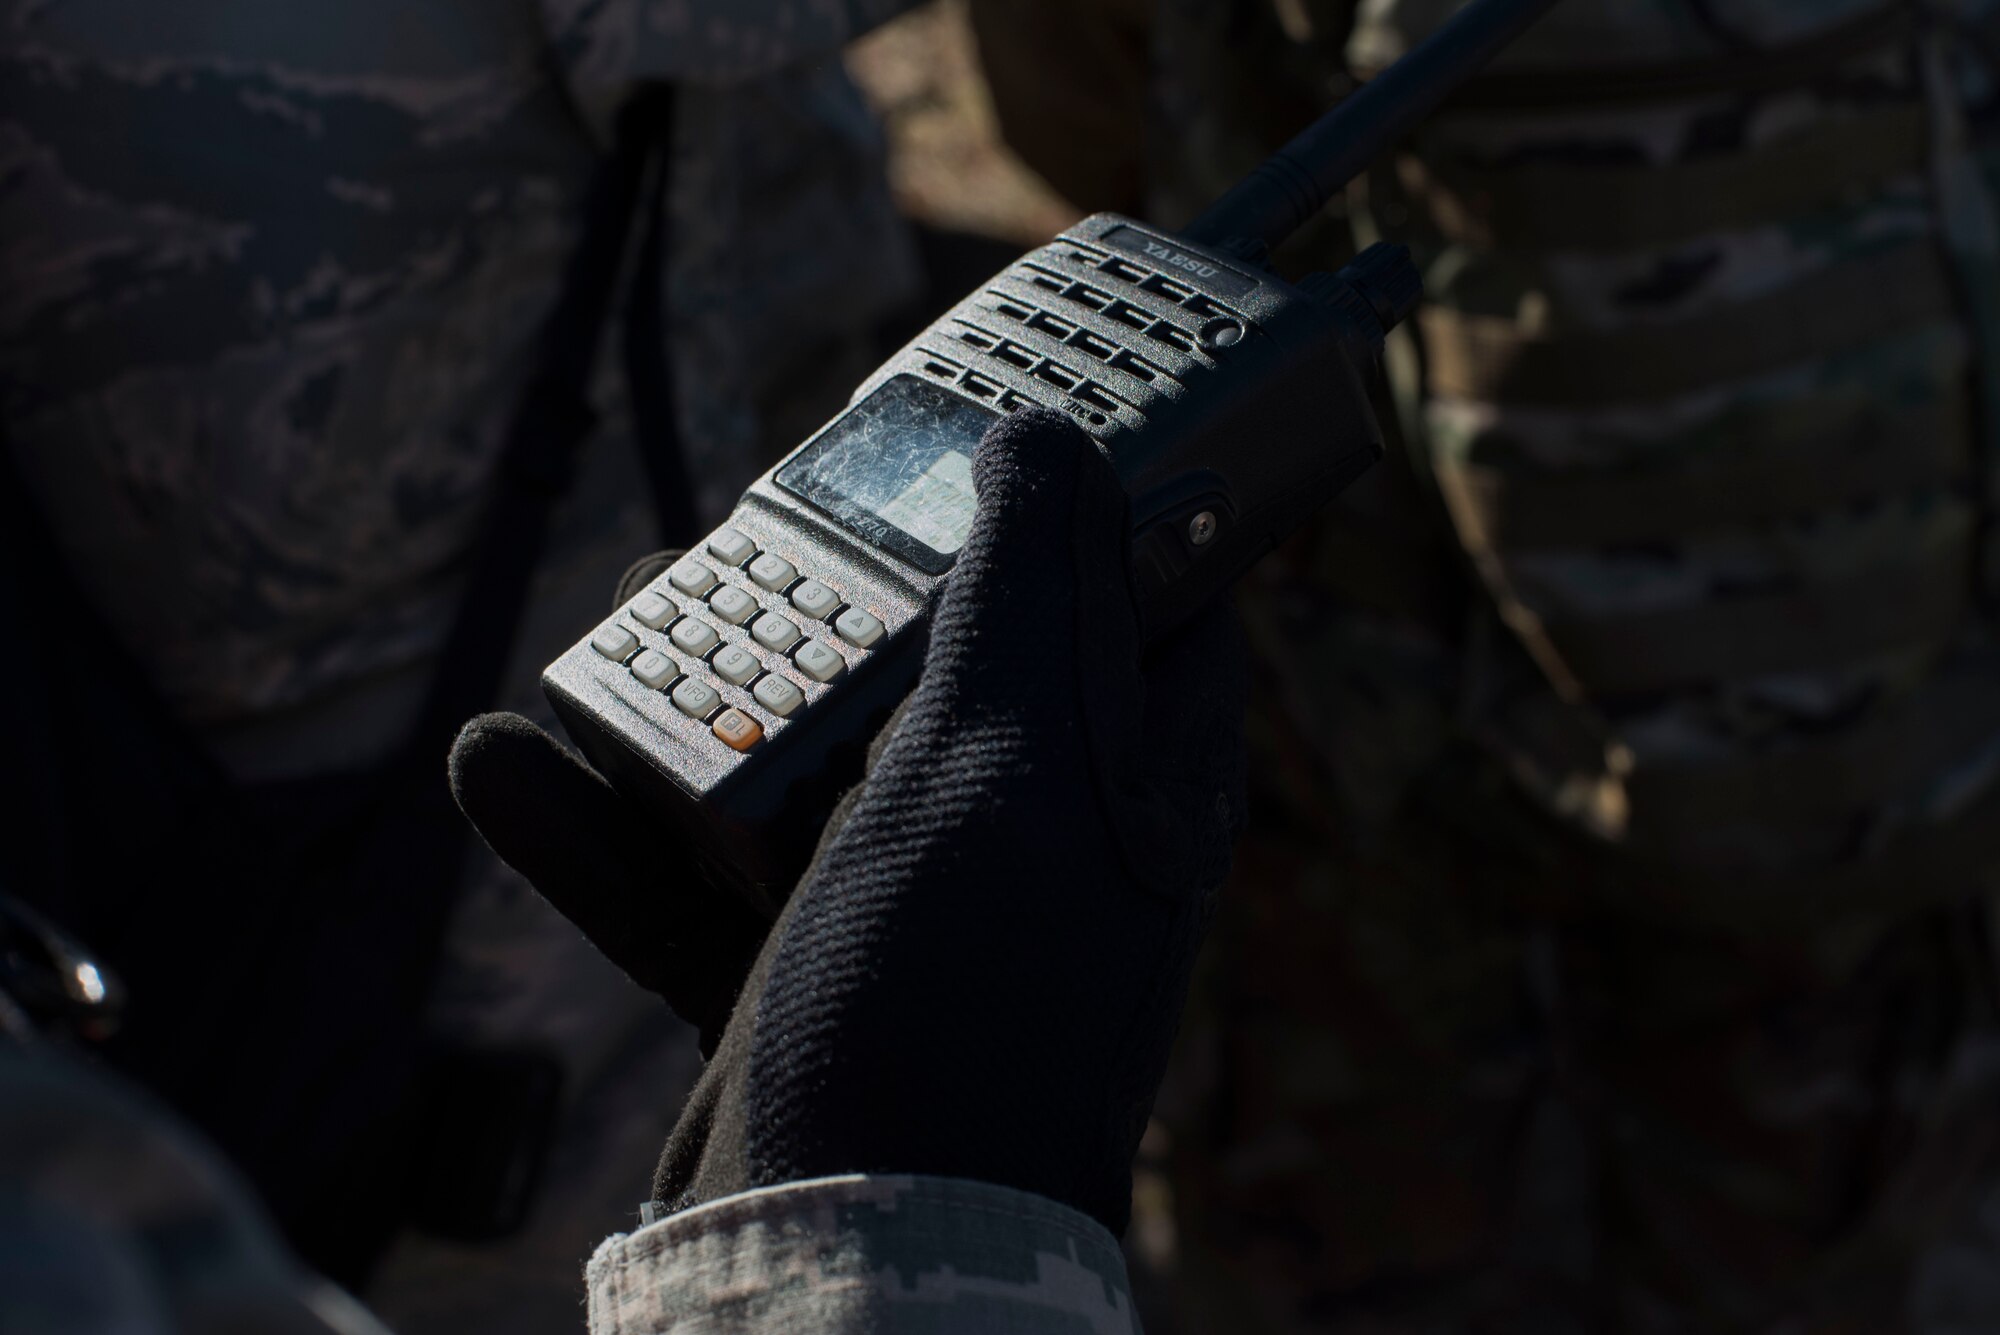 Members of the 820th Base Defense Group sync radio channels before starting counter-improvised explosive device (IED) training, Jan. 24, 2018, at Moody Air Force Base, Ga. The 820th BDG defenders trained on how to detect IEDs and countermeasures to take when one is found. IEDs have become one of the most common forms of attack in the Middle East since 2003. (U.S. Air Force photos by Staff Sgt. Eric Summers Jr.)